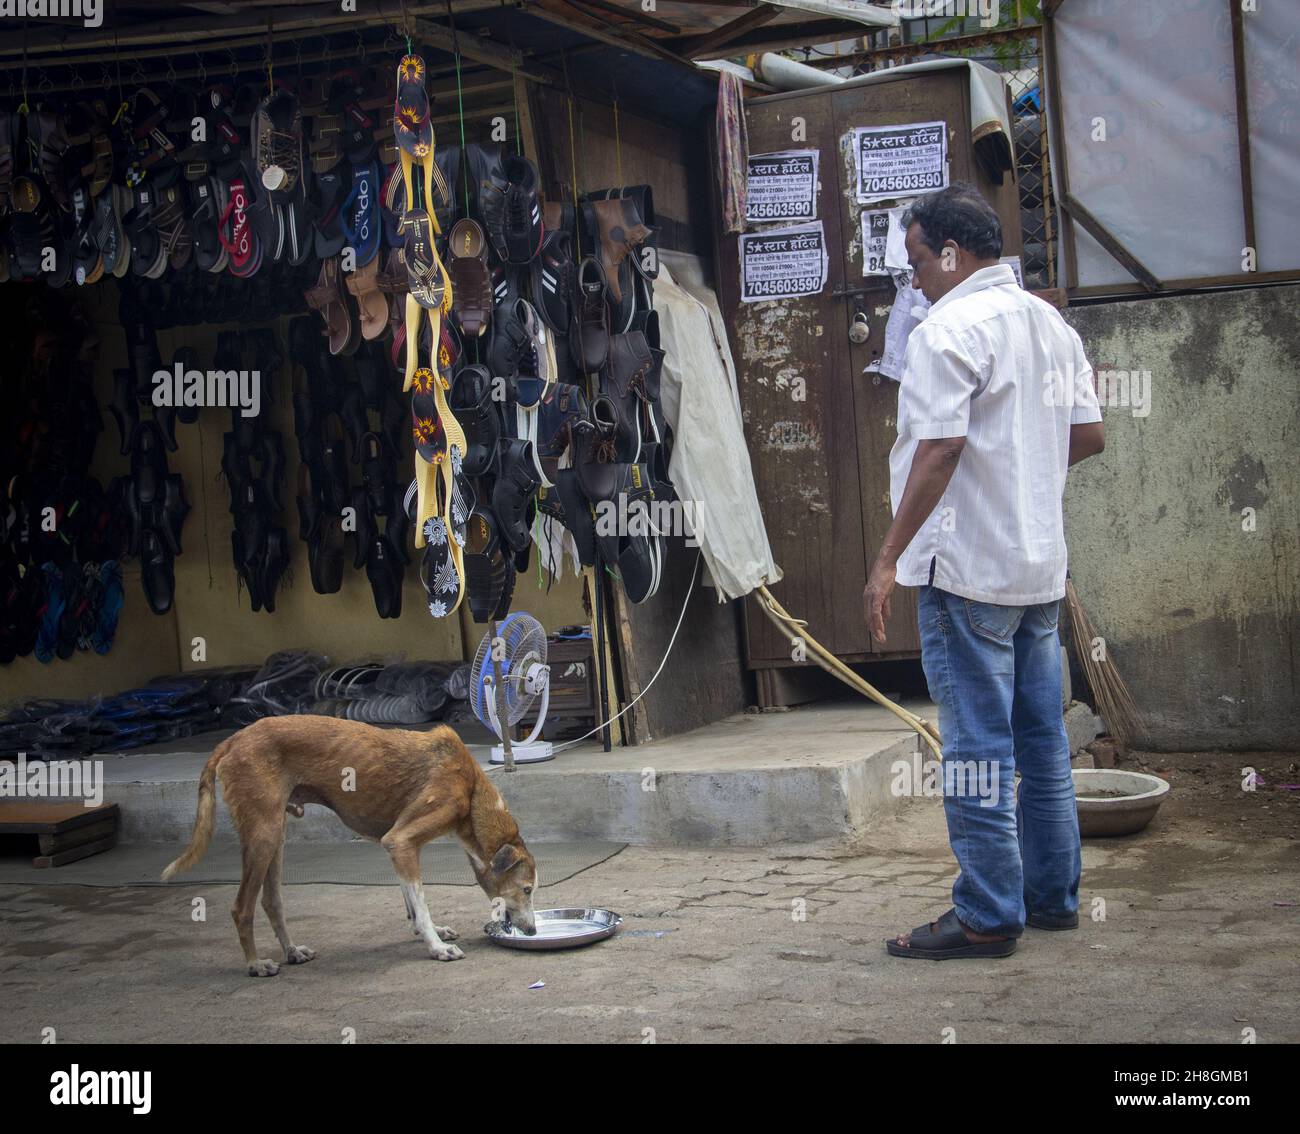 MUMBAI, INDIA - Nov 18, 2021: A street dog having food and a man watching him in front of a slipper shop Stock Photo